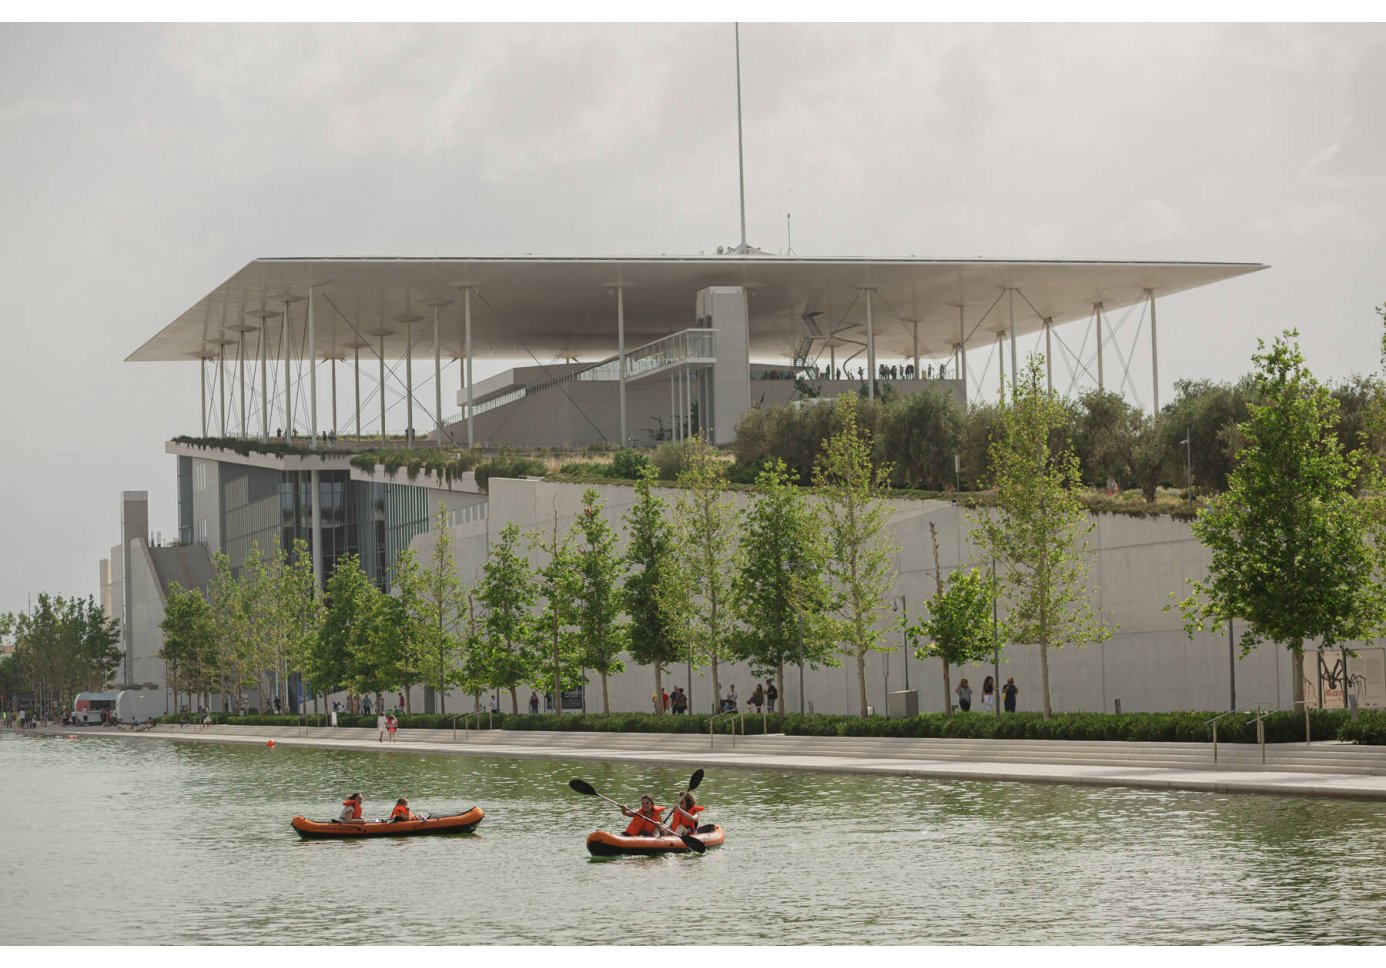 people kayaking in a man-made canal in front of a contemporary structure